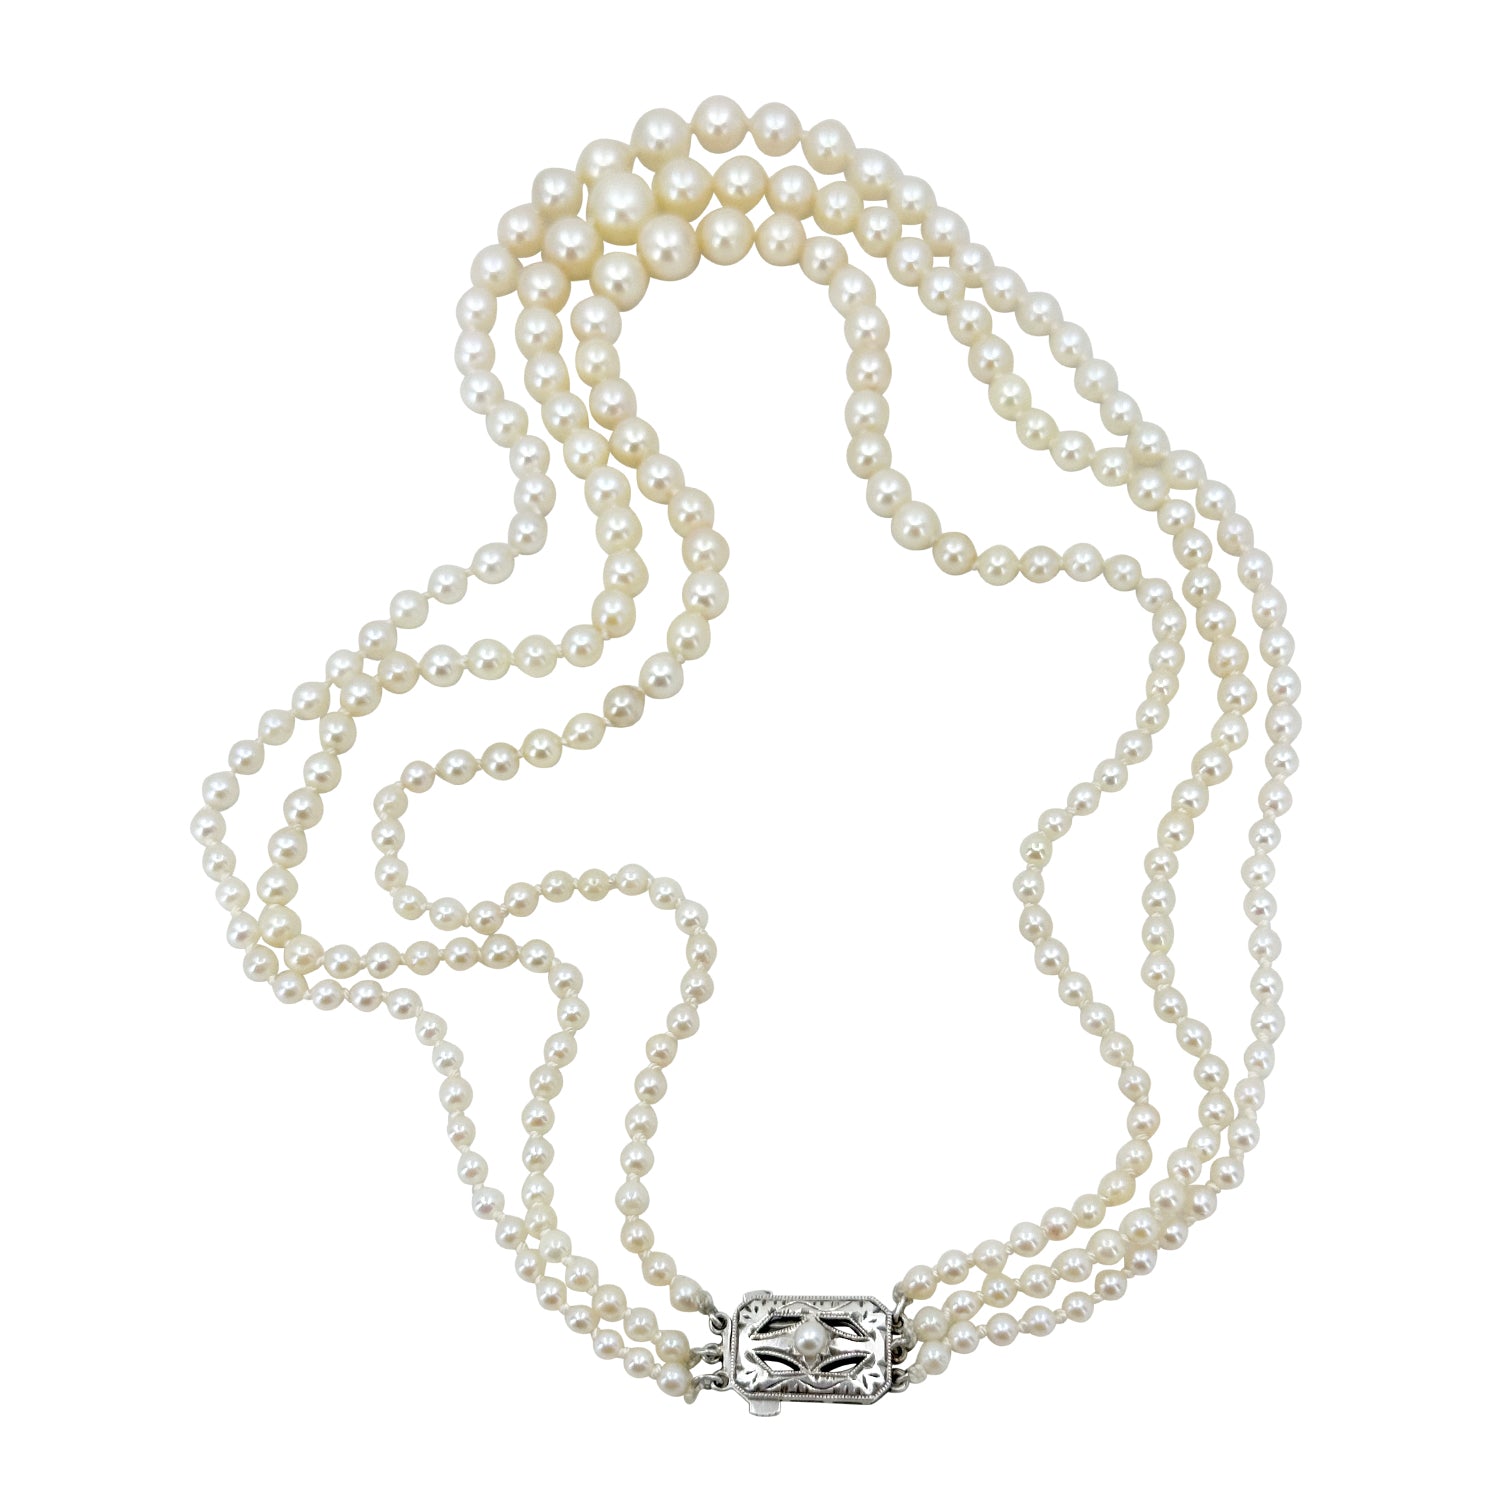 Art Deco Engraved Triple Strand Graduated Japanese Saltwater Akoya Cultured Pearl Necklace -Sterling Silver 16.50, 17.50 & 18 Inch